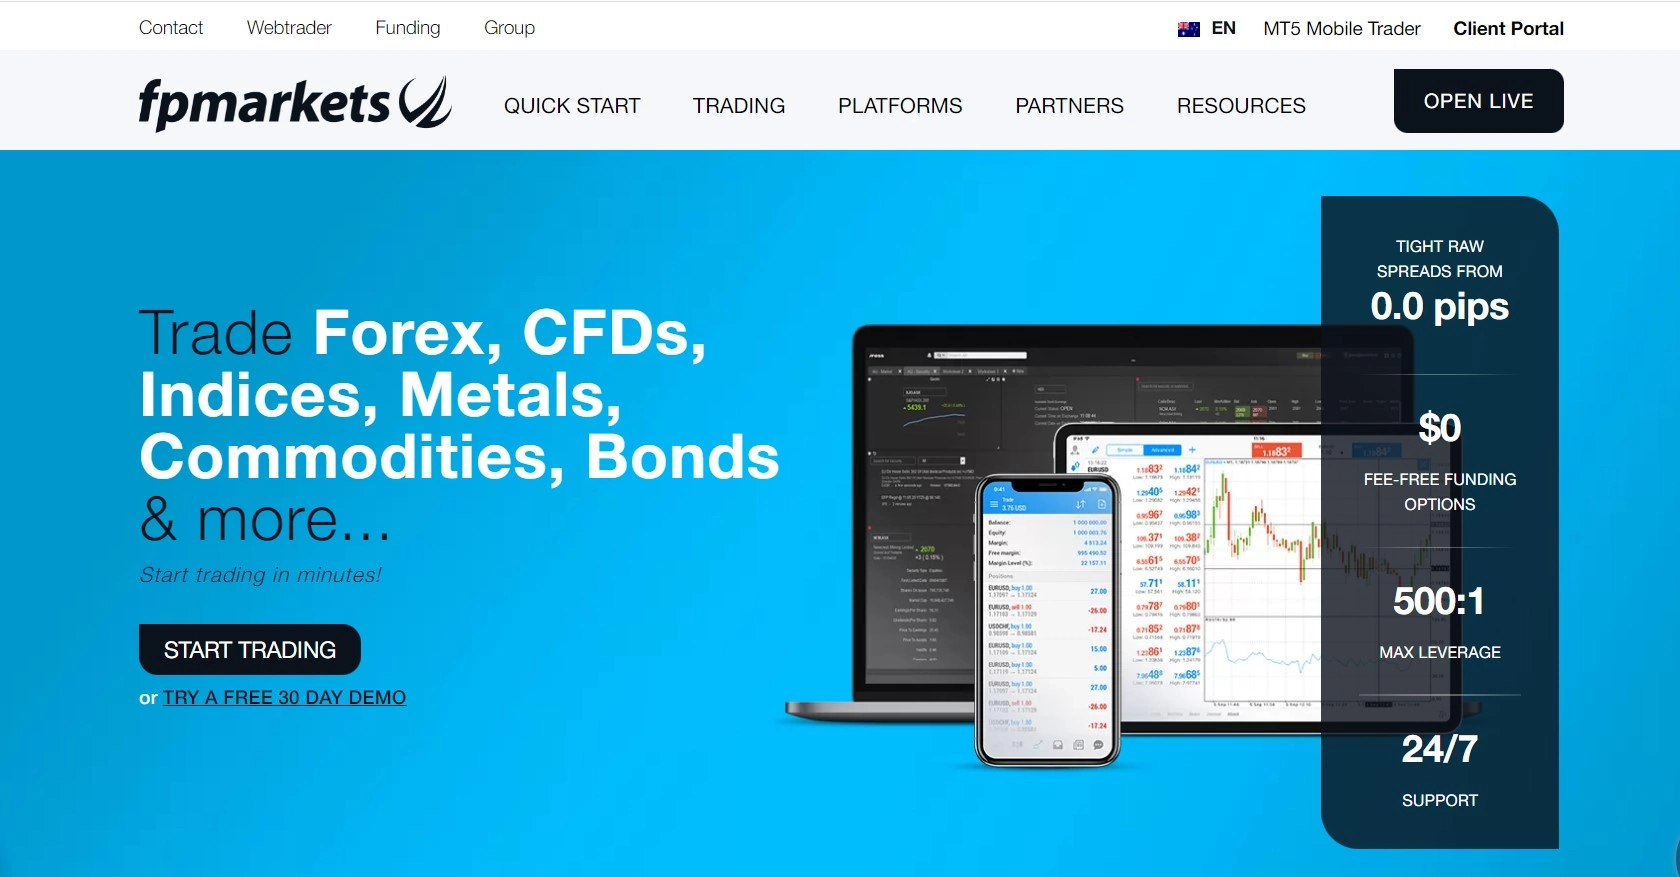 The official website of FP markets